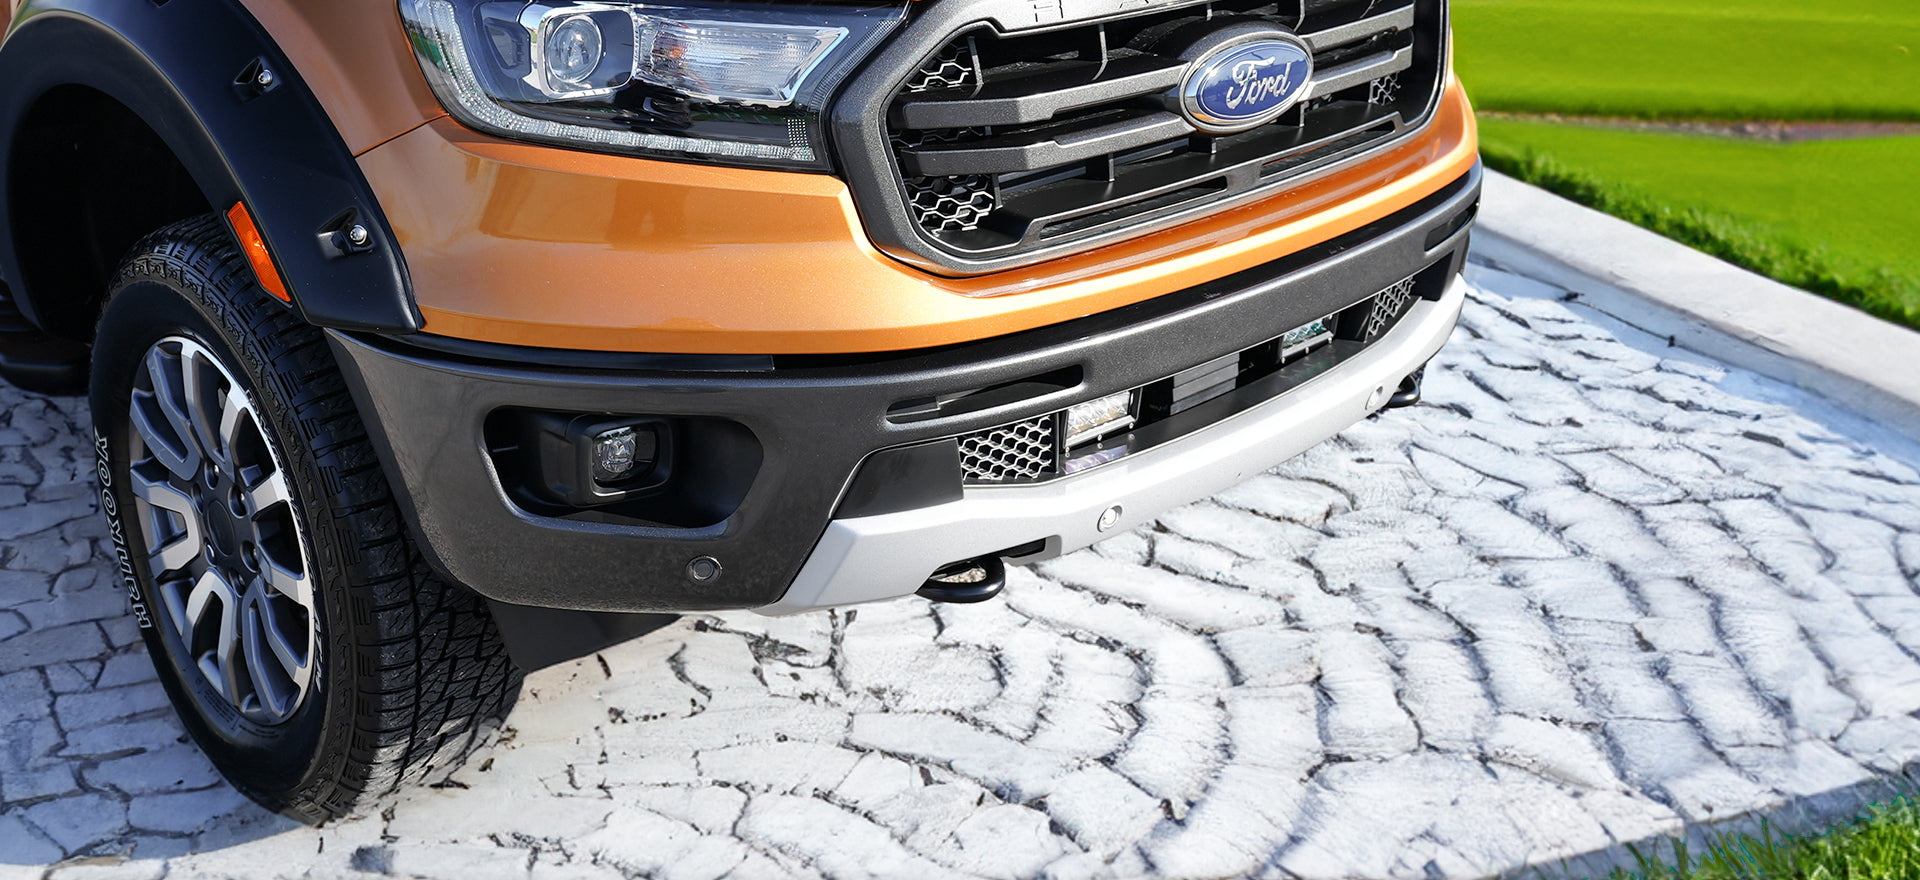 Ford Ranger Bumpers